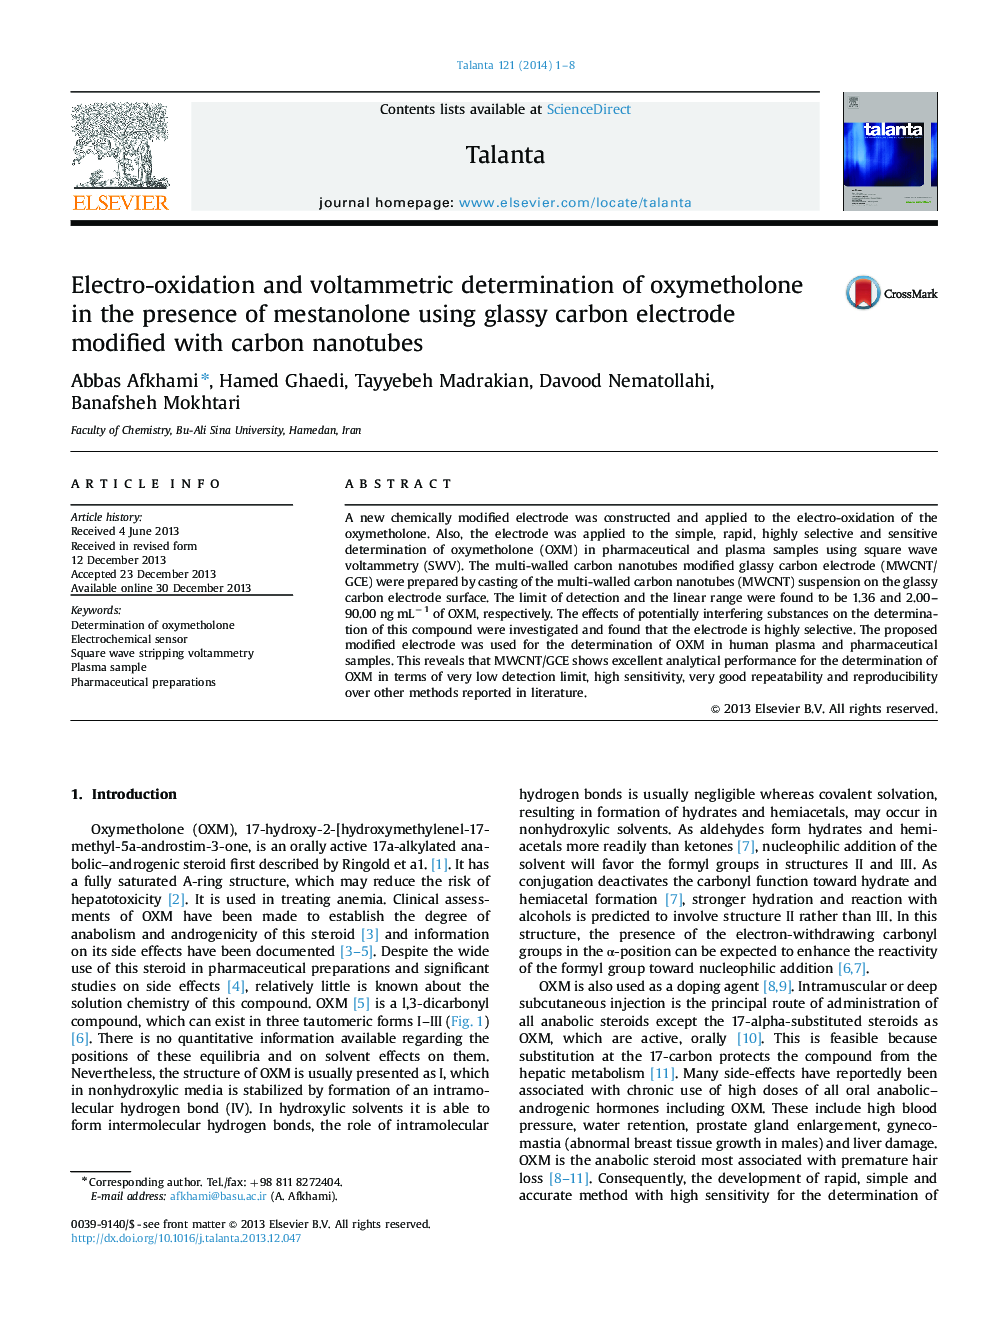 Electro-oxidation and voltammetric determination of oxymetholone in the presence of mestanolone using glassy carbon electrode modified with carbon nanotubes